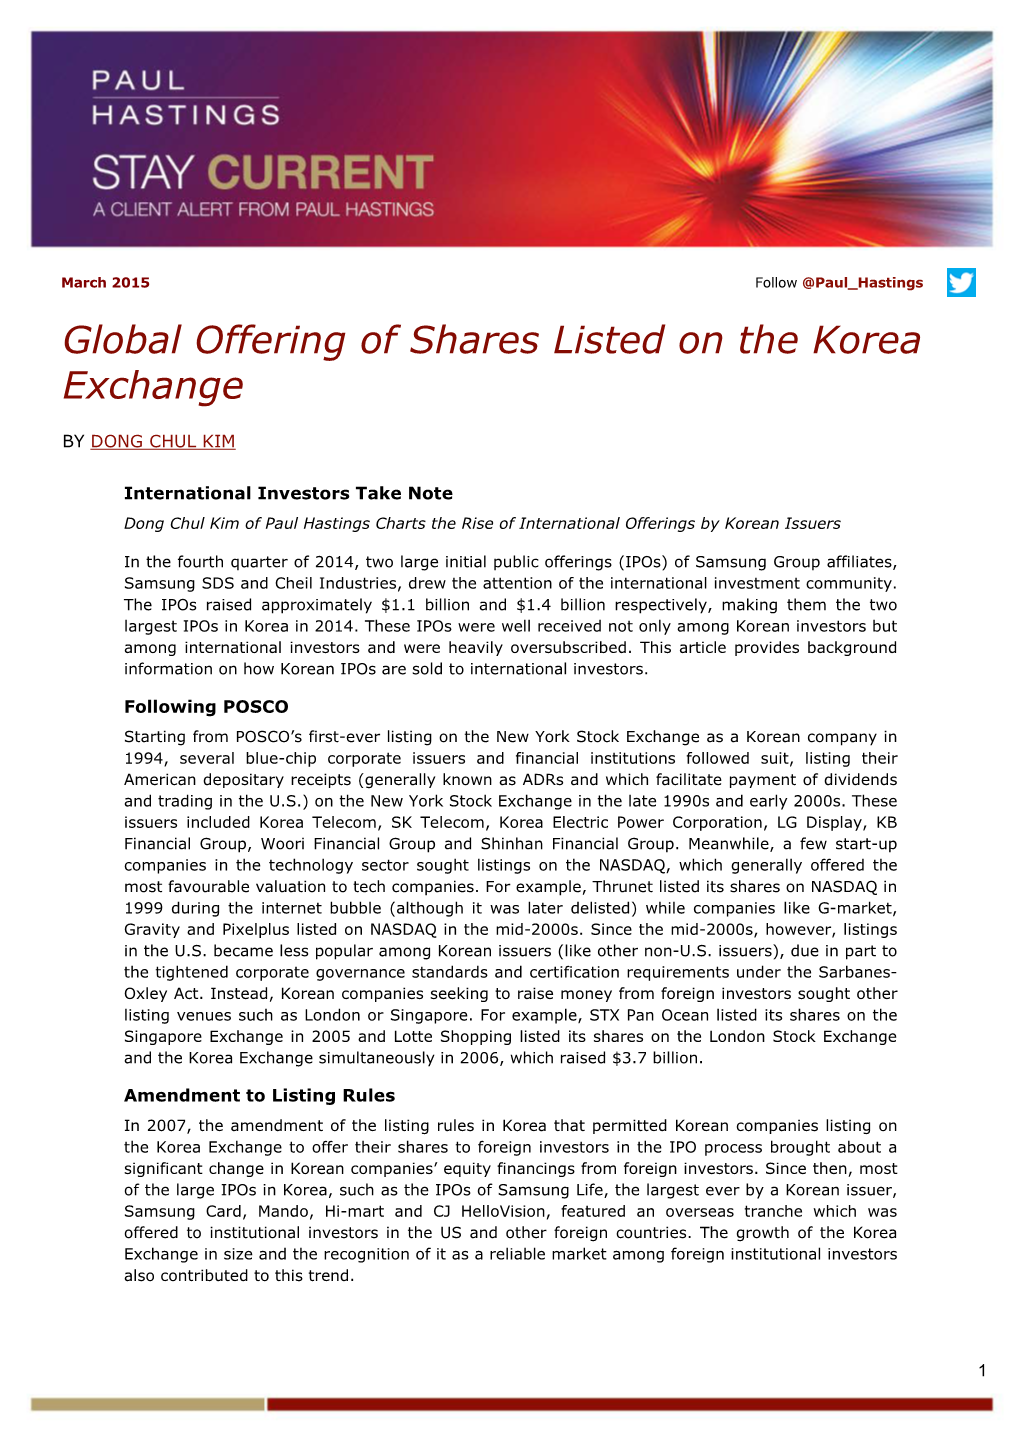 Global Offering of Shares Listed on the Korea Exchange